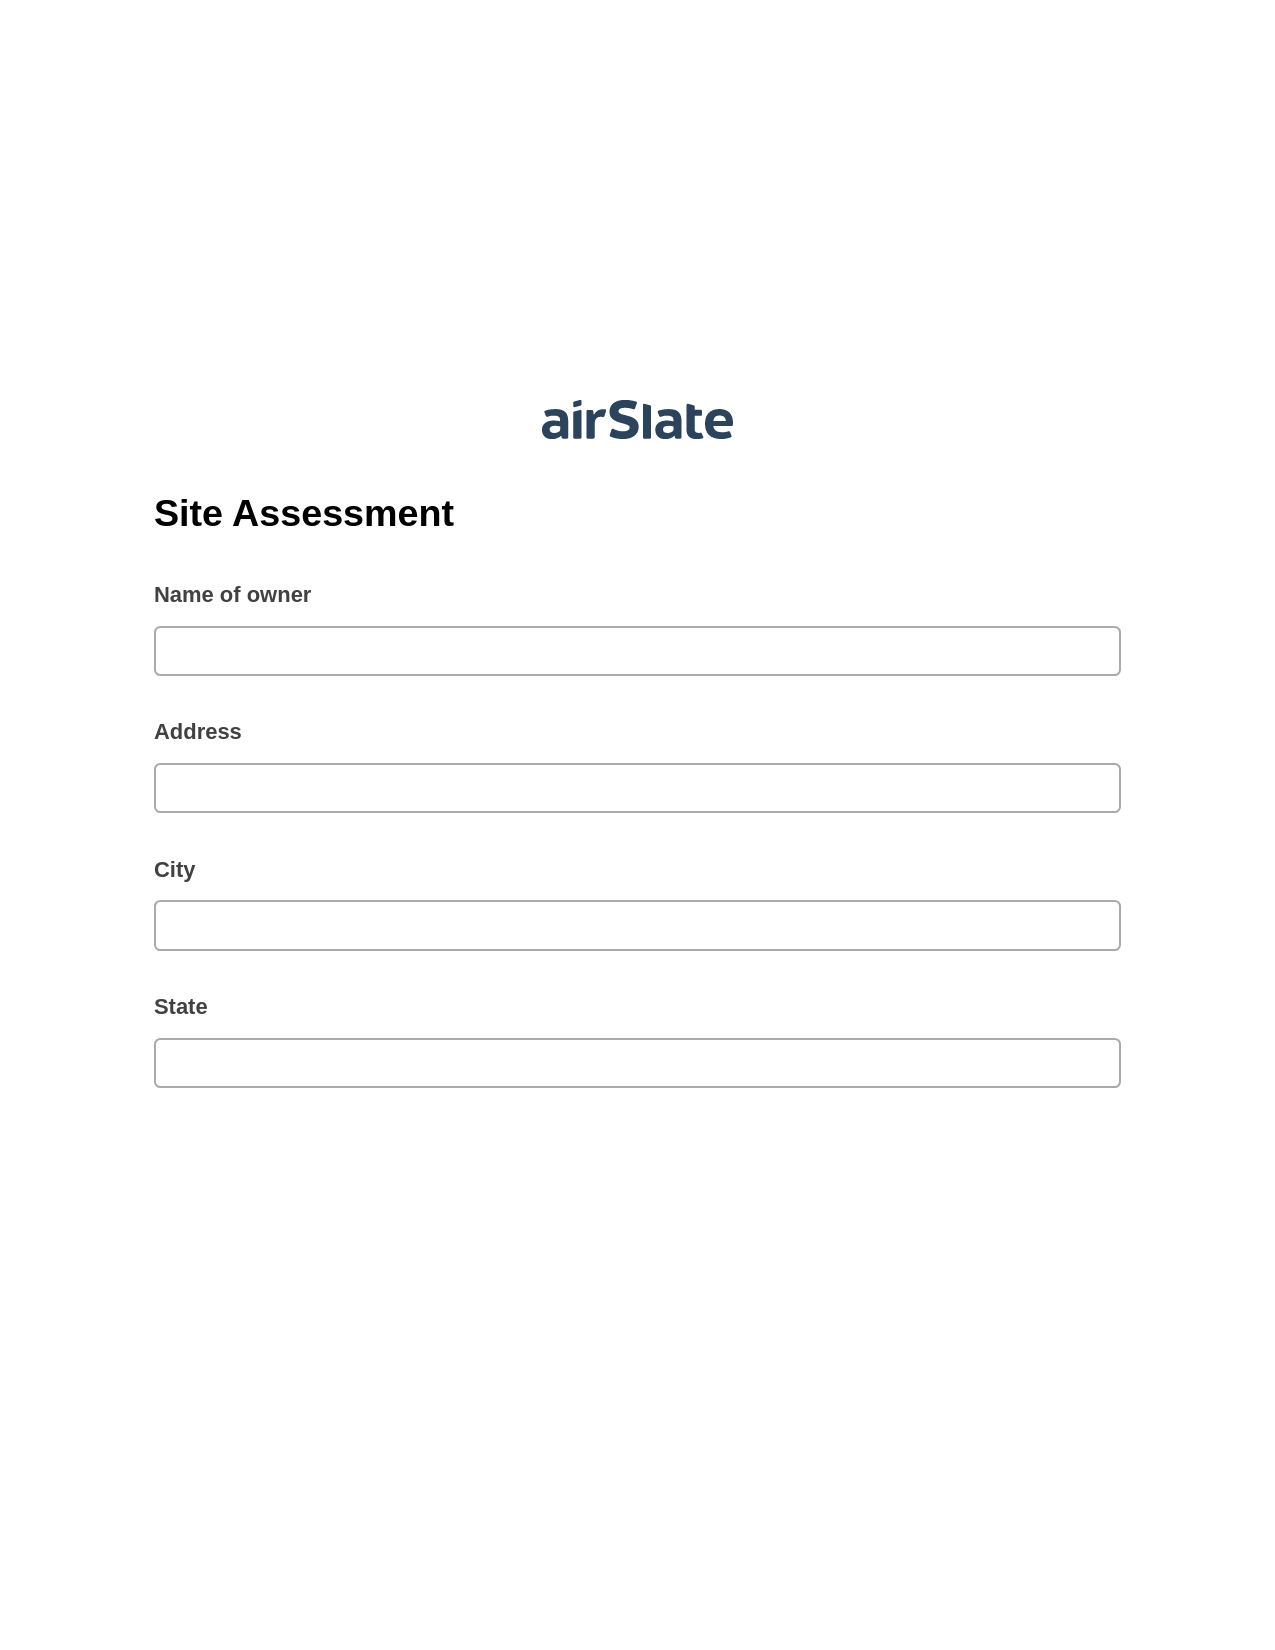 Multirole Site Assessment Pre-fill Slate from MS Dynamics 365 Records Bot, Create MS Dynamics 365 Records Bot, Export to NetSuite Record Bot